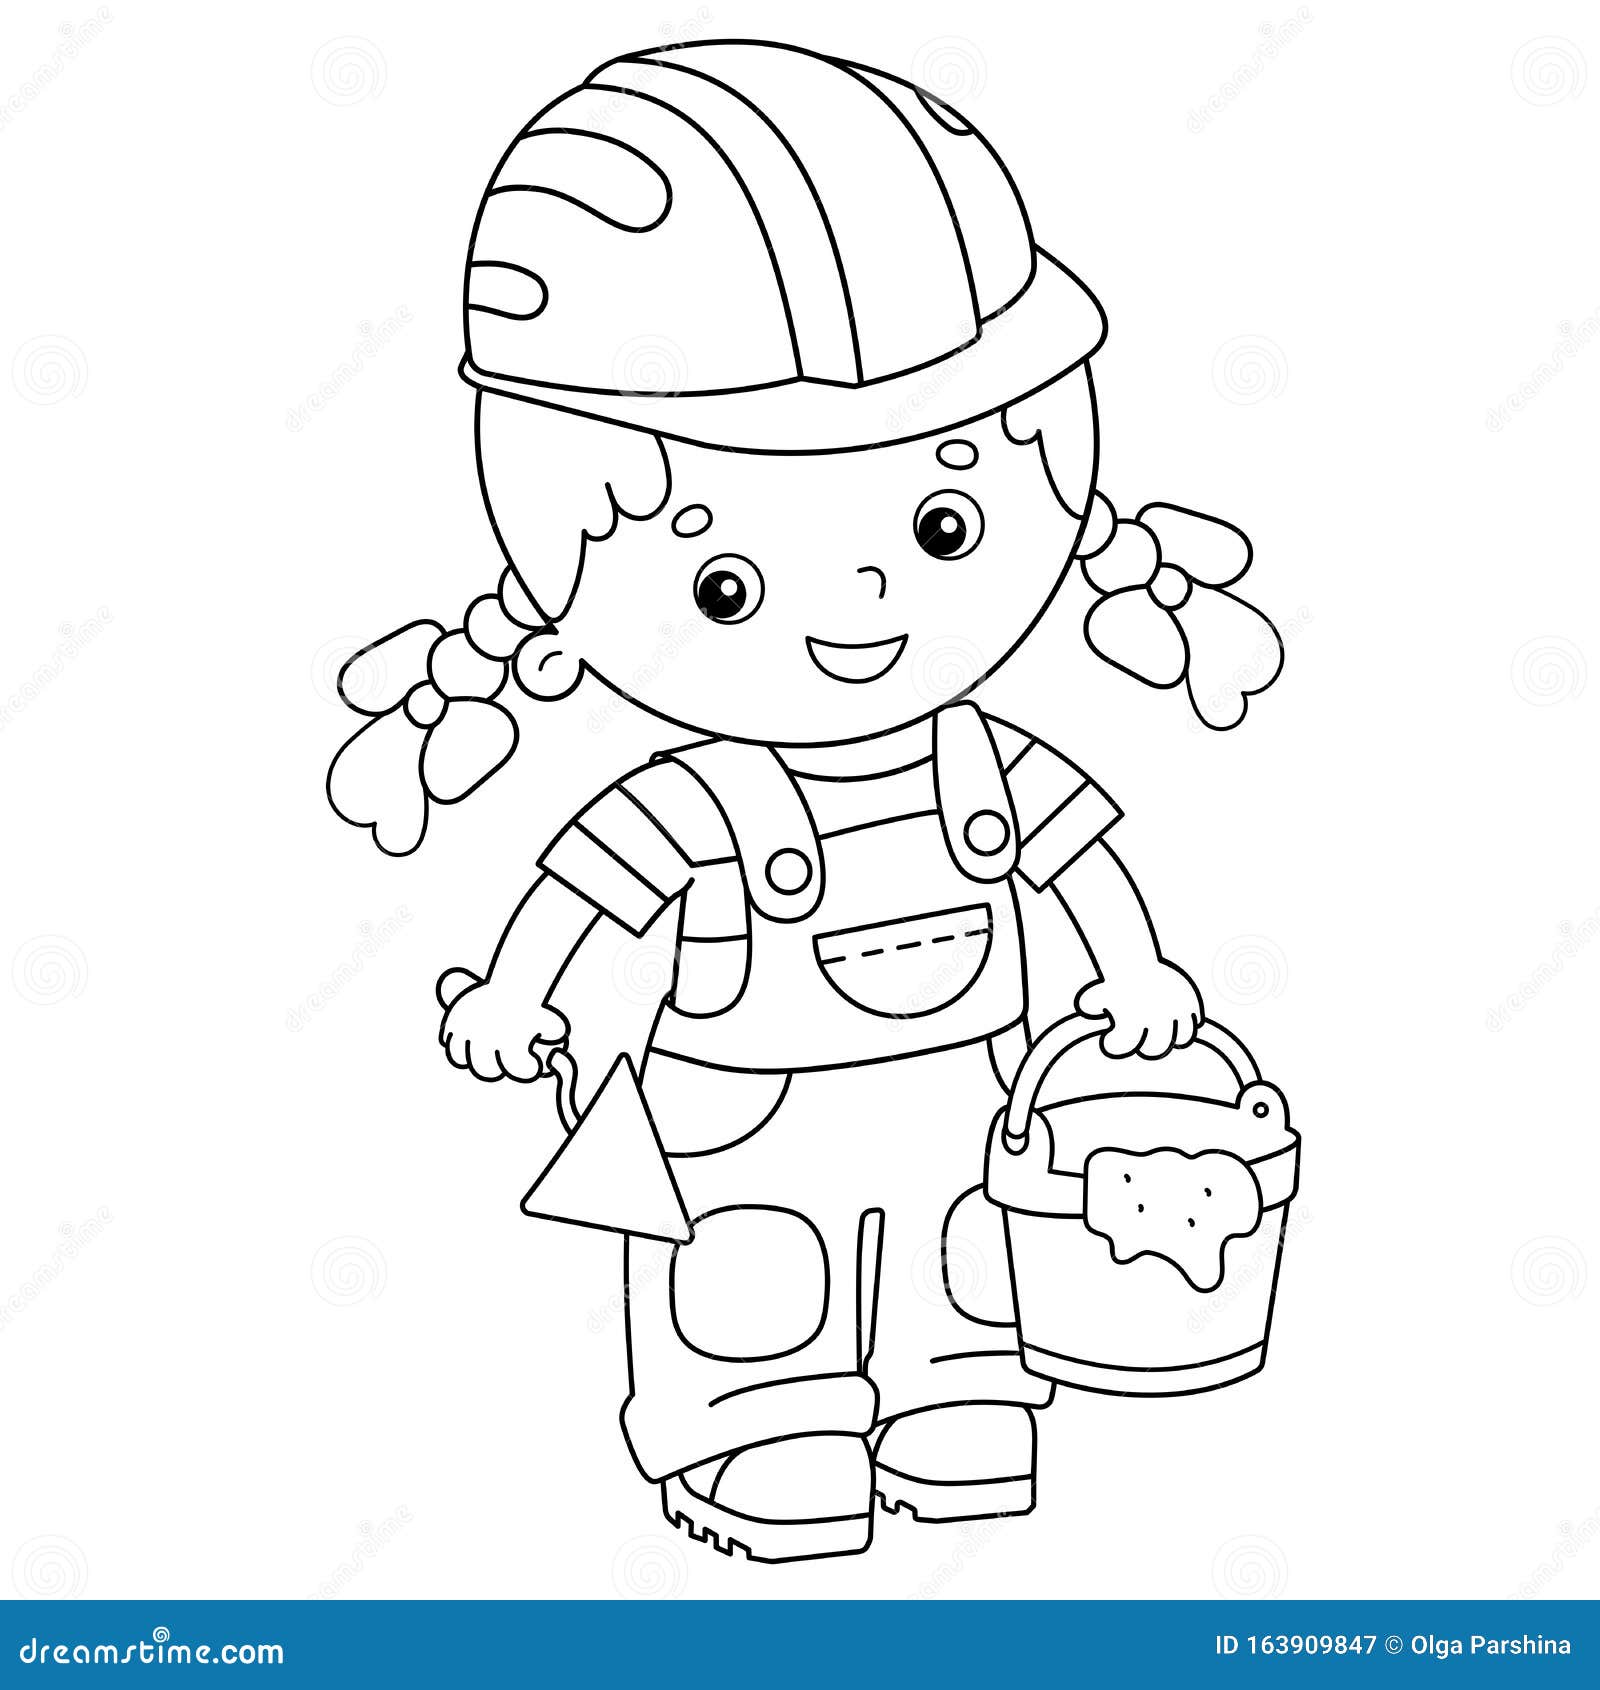 Coloring Page Outline of Cartoon Builder Girl with Cement Mortar and  Trowel. Profession Stock Vector - Illustration of construction, brick:  163909847